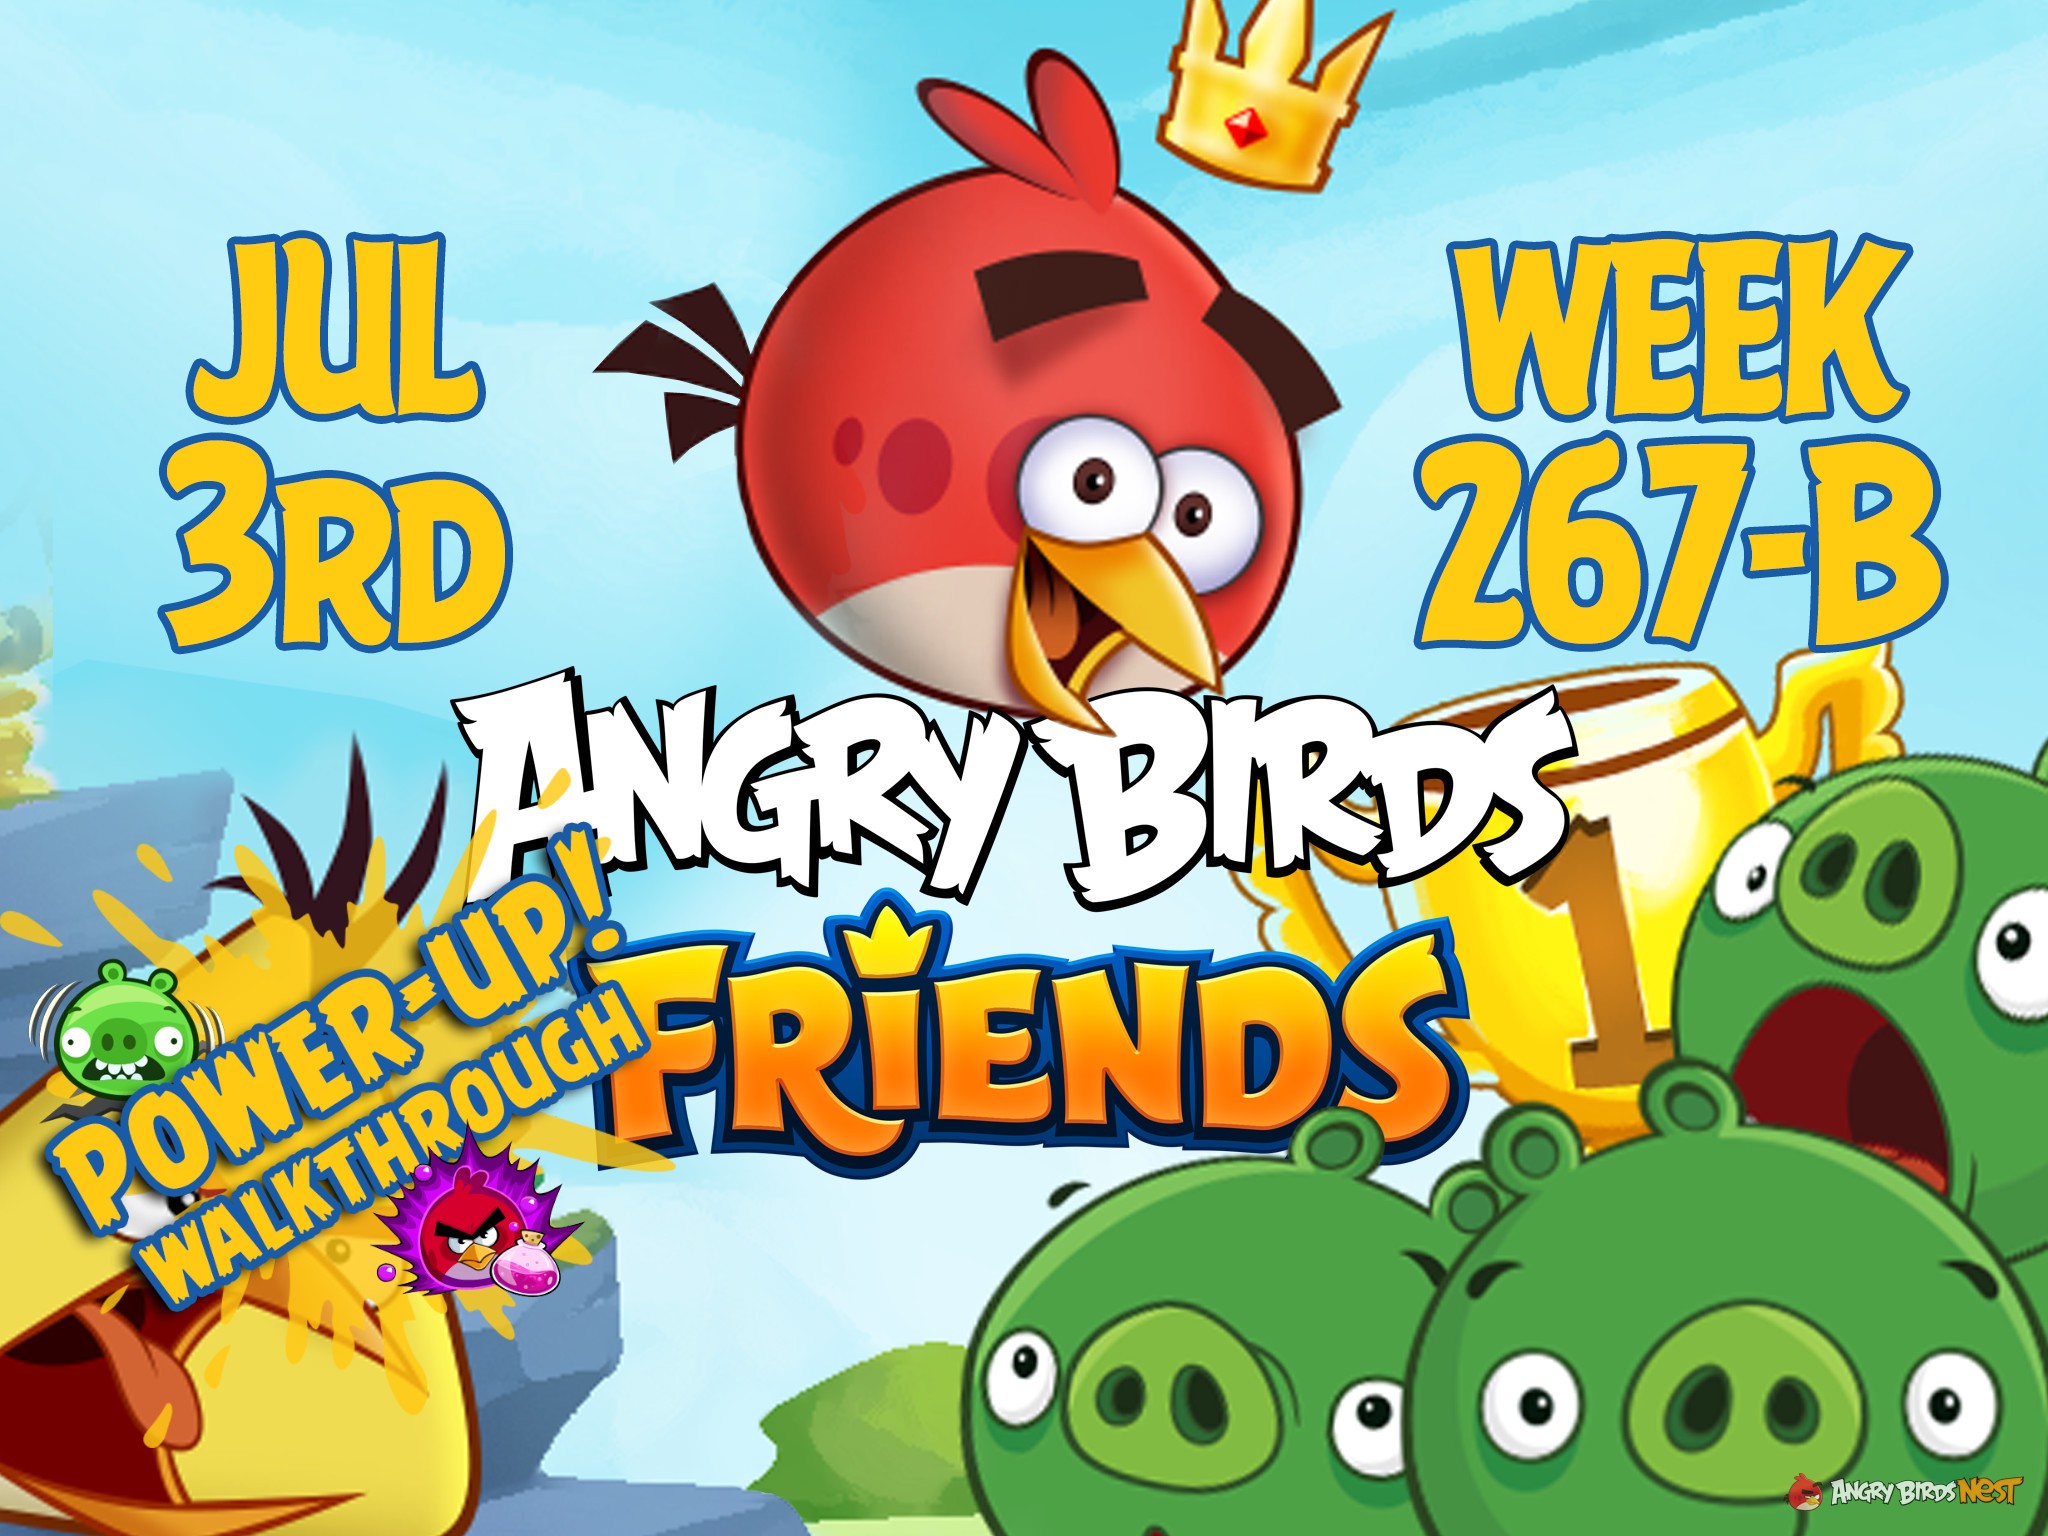 Angry Birds Friends Tournament Week 267-B Feature Image PU